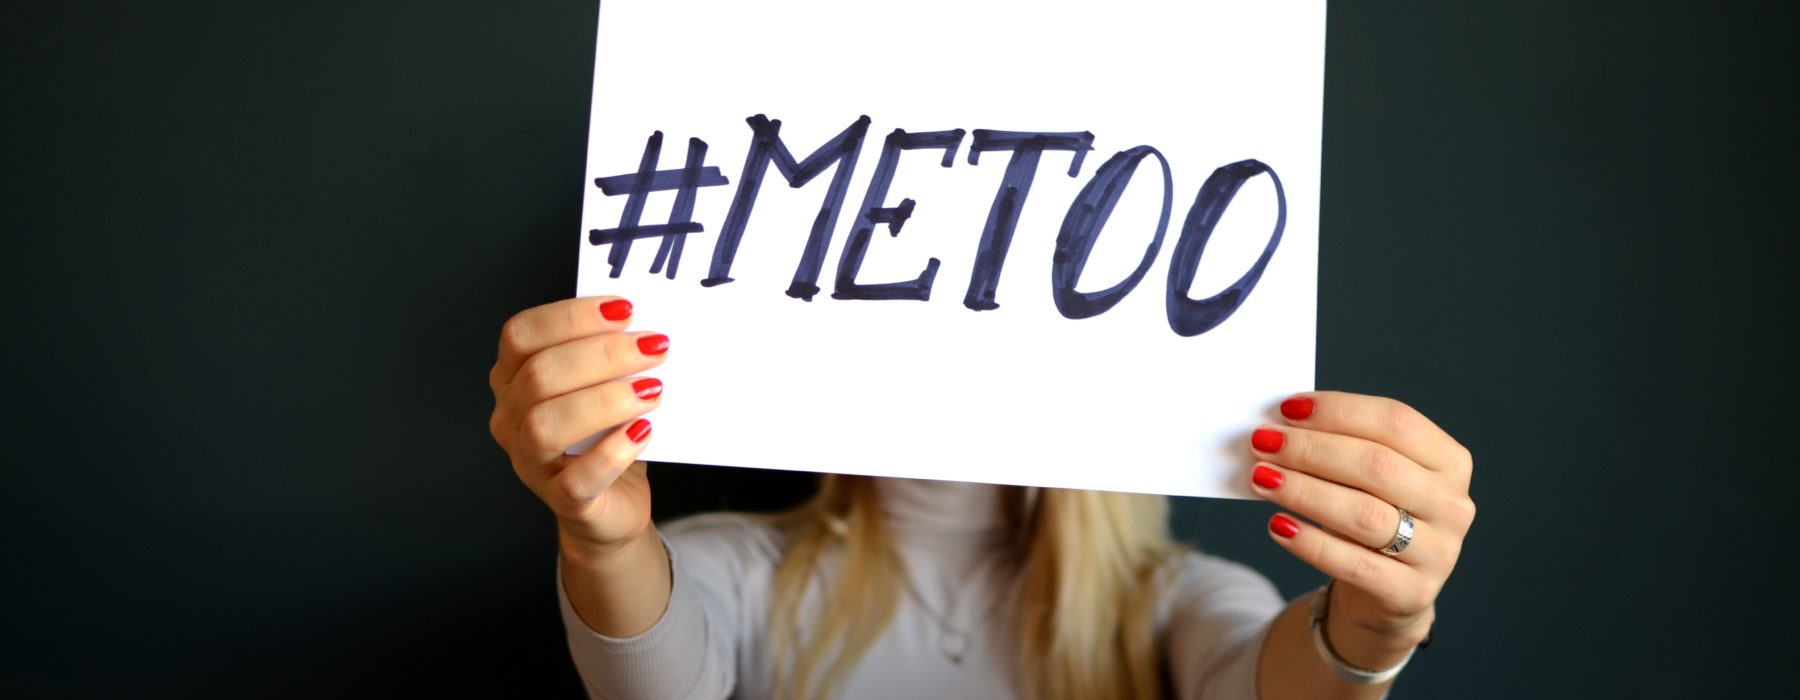 Image of a woman holding a placard for the #meToo campaign